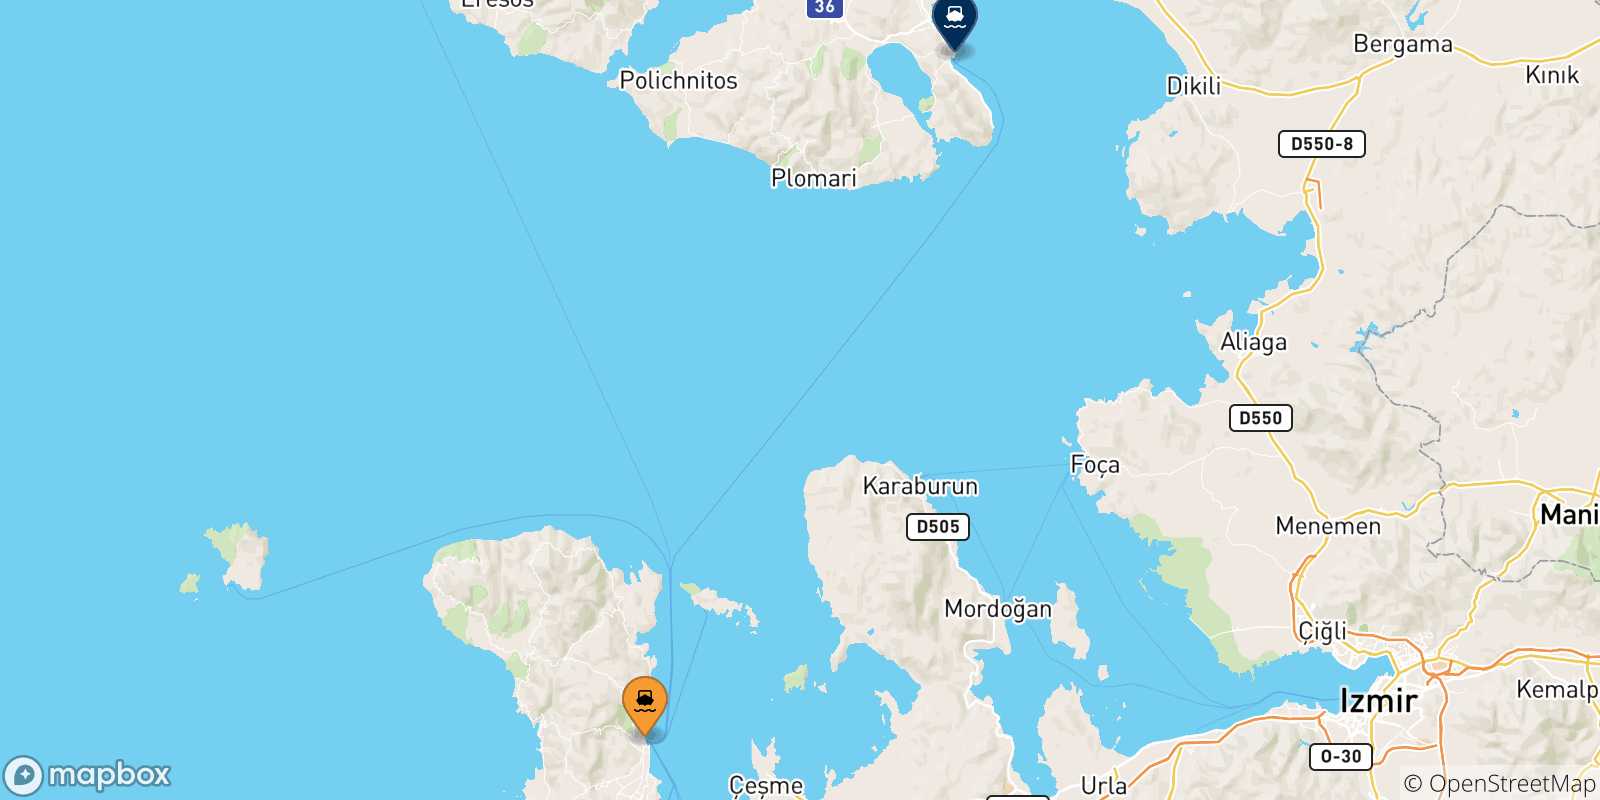 Map of the possible routes between Mesta Chios and Aegean Islands